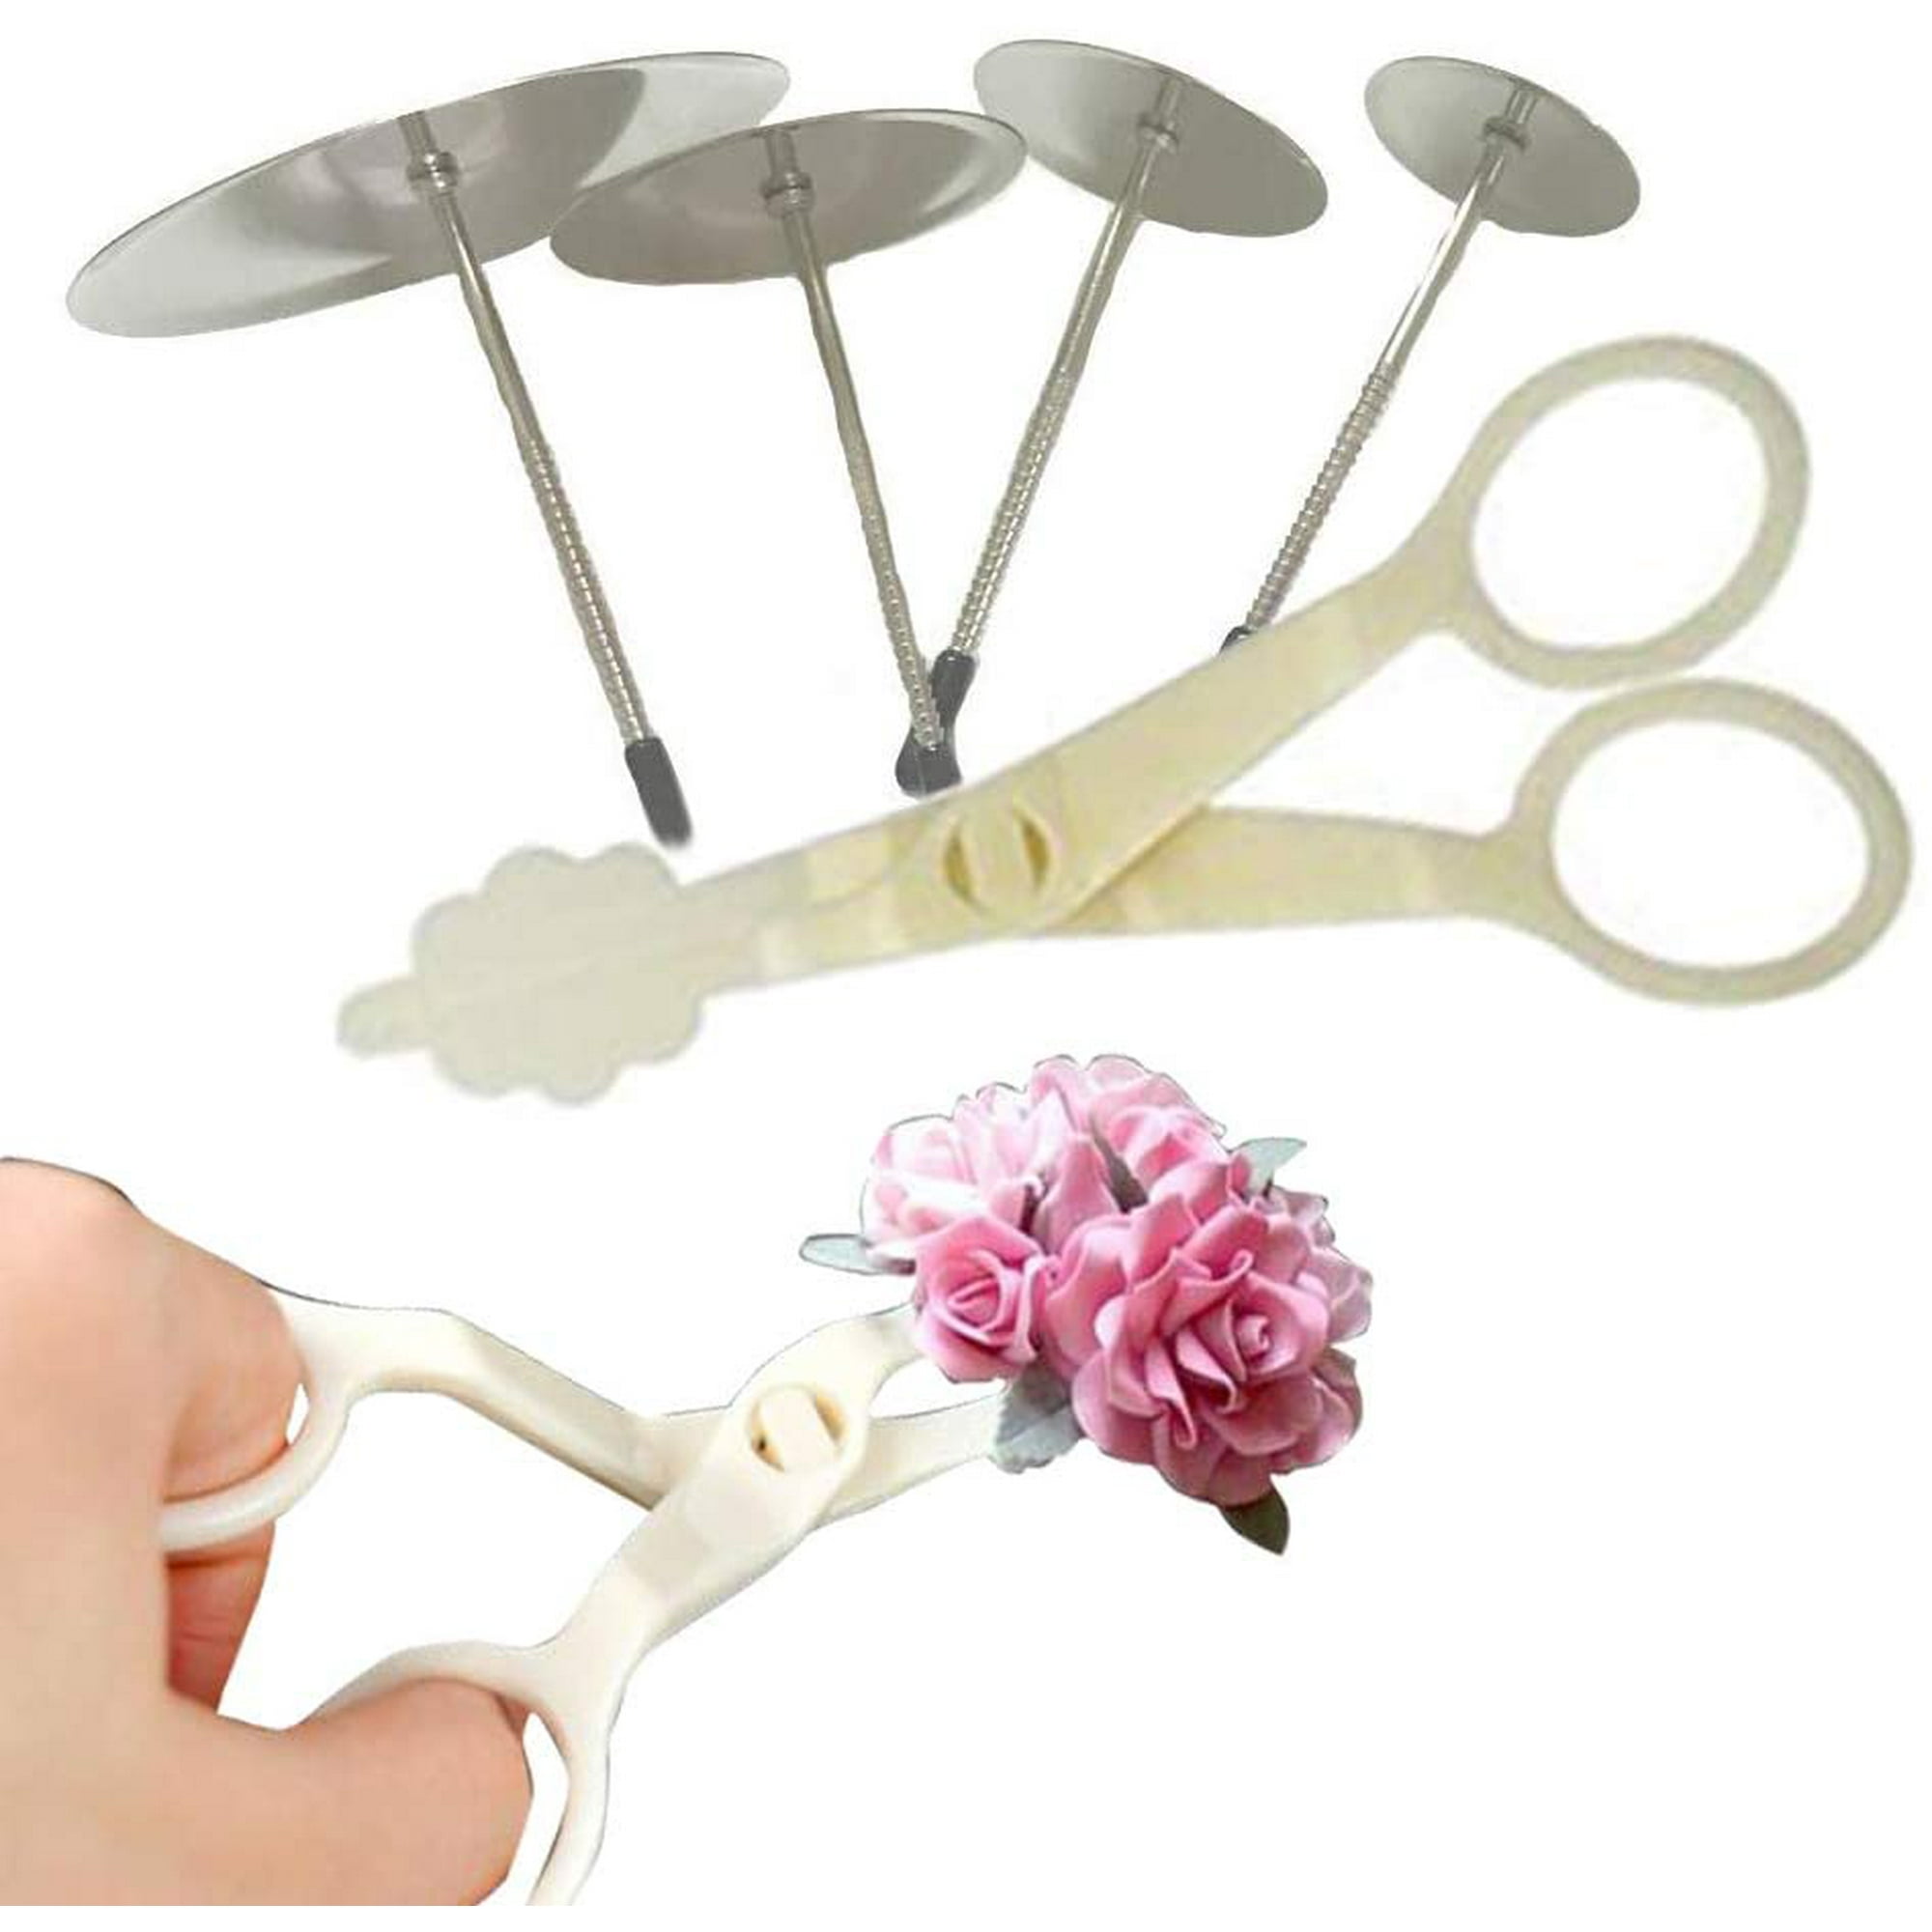 Cake Flower Nail & Flower Lifters Stainless Steel Cake Cupcake Decor Tools  Baking Tools for Icing Flowers Decoration | Walmart Canada